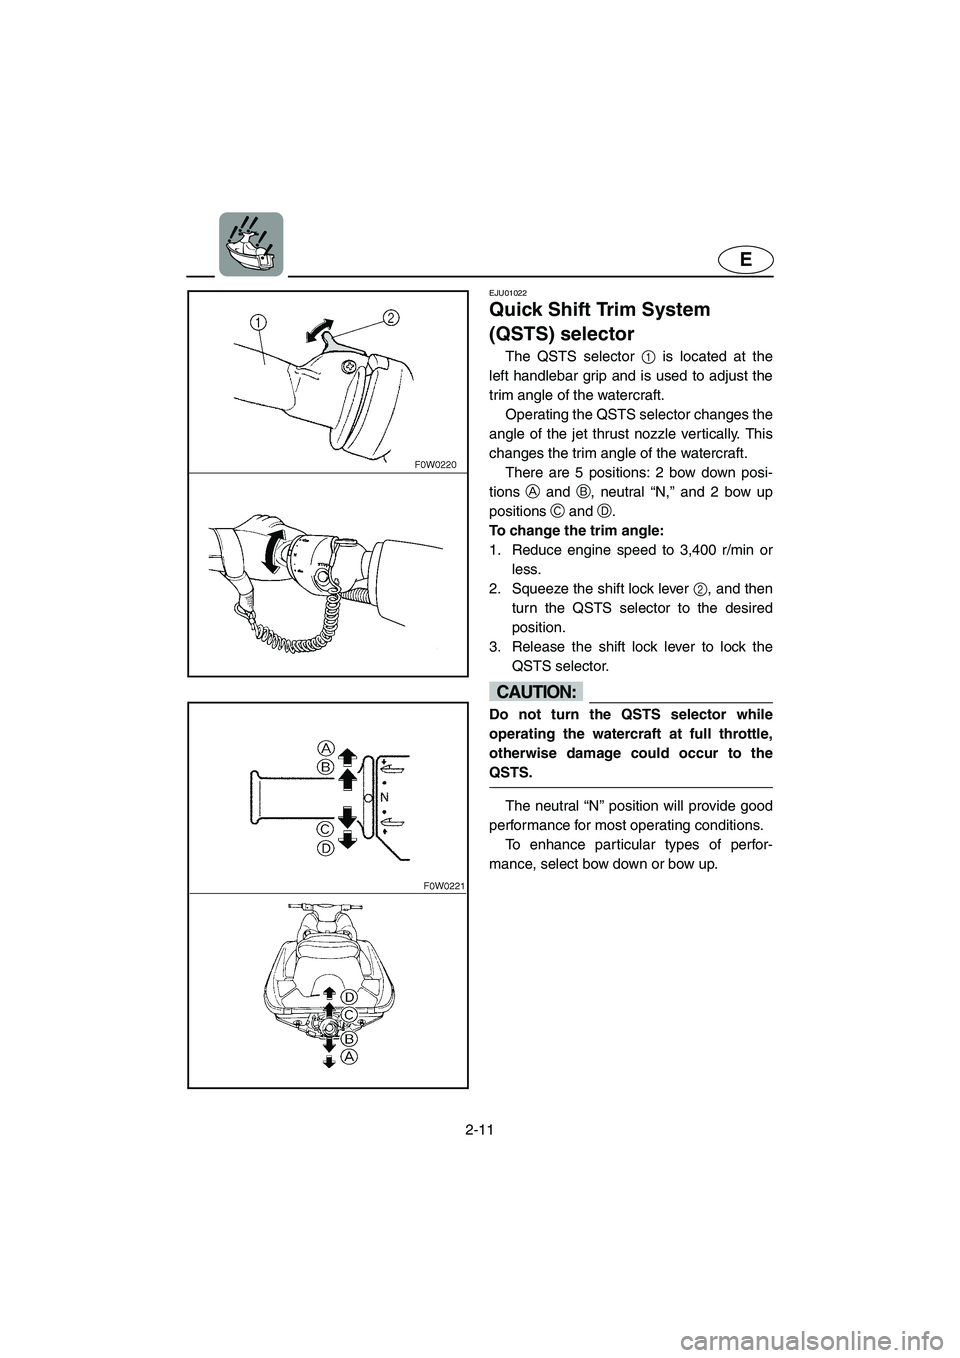 YAMAHA GP800R 2002  Owners Manual 2-11
E
EJU01022 
Quick Shift Trim System 
(QSTS) selector  
The QSTS selector 1 is located at the
left handlebar grip and is used to adjust the
trim angle of the watercraft. 
Operating the QSTS select